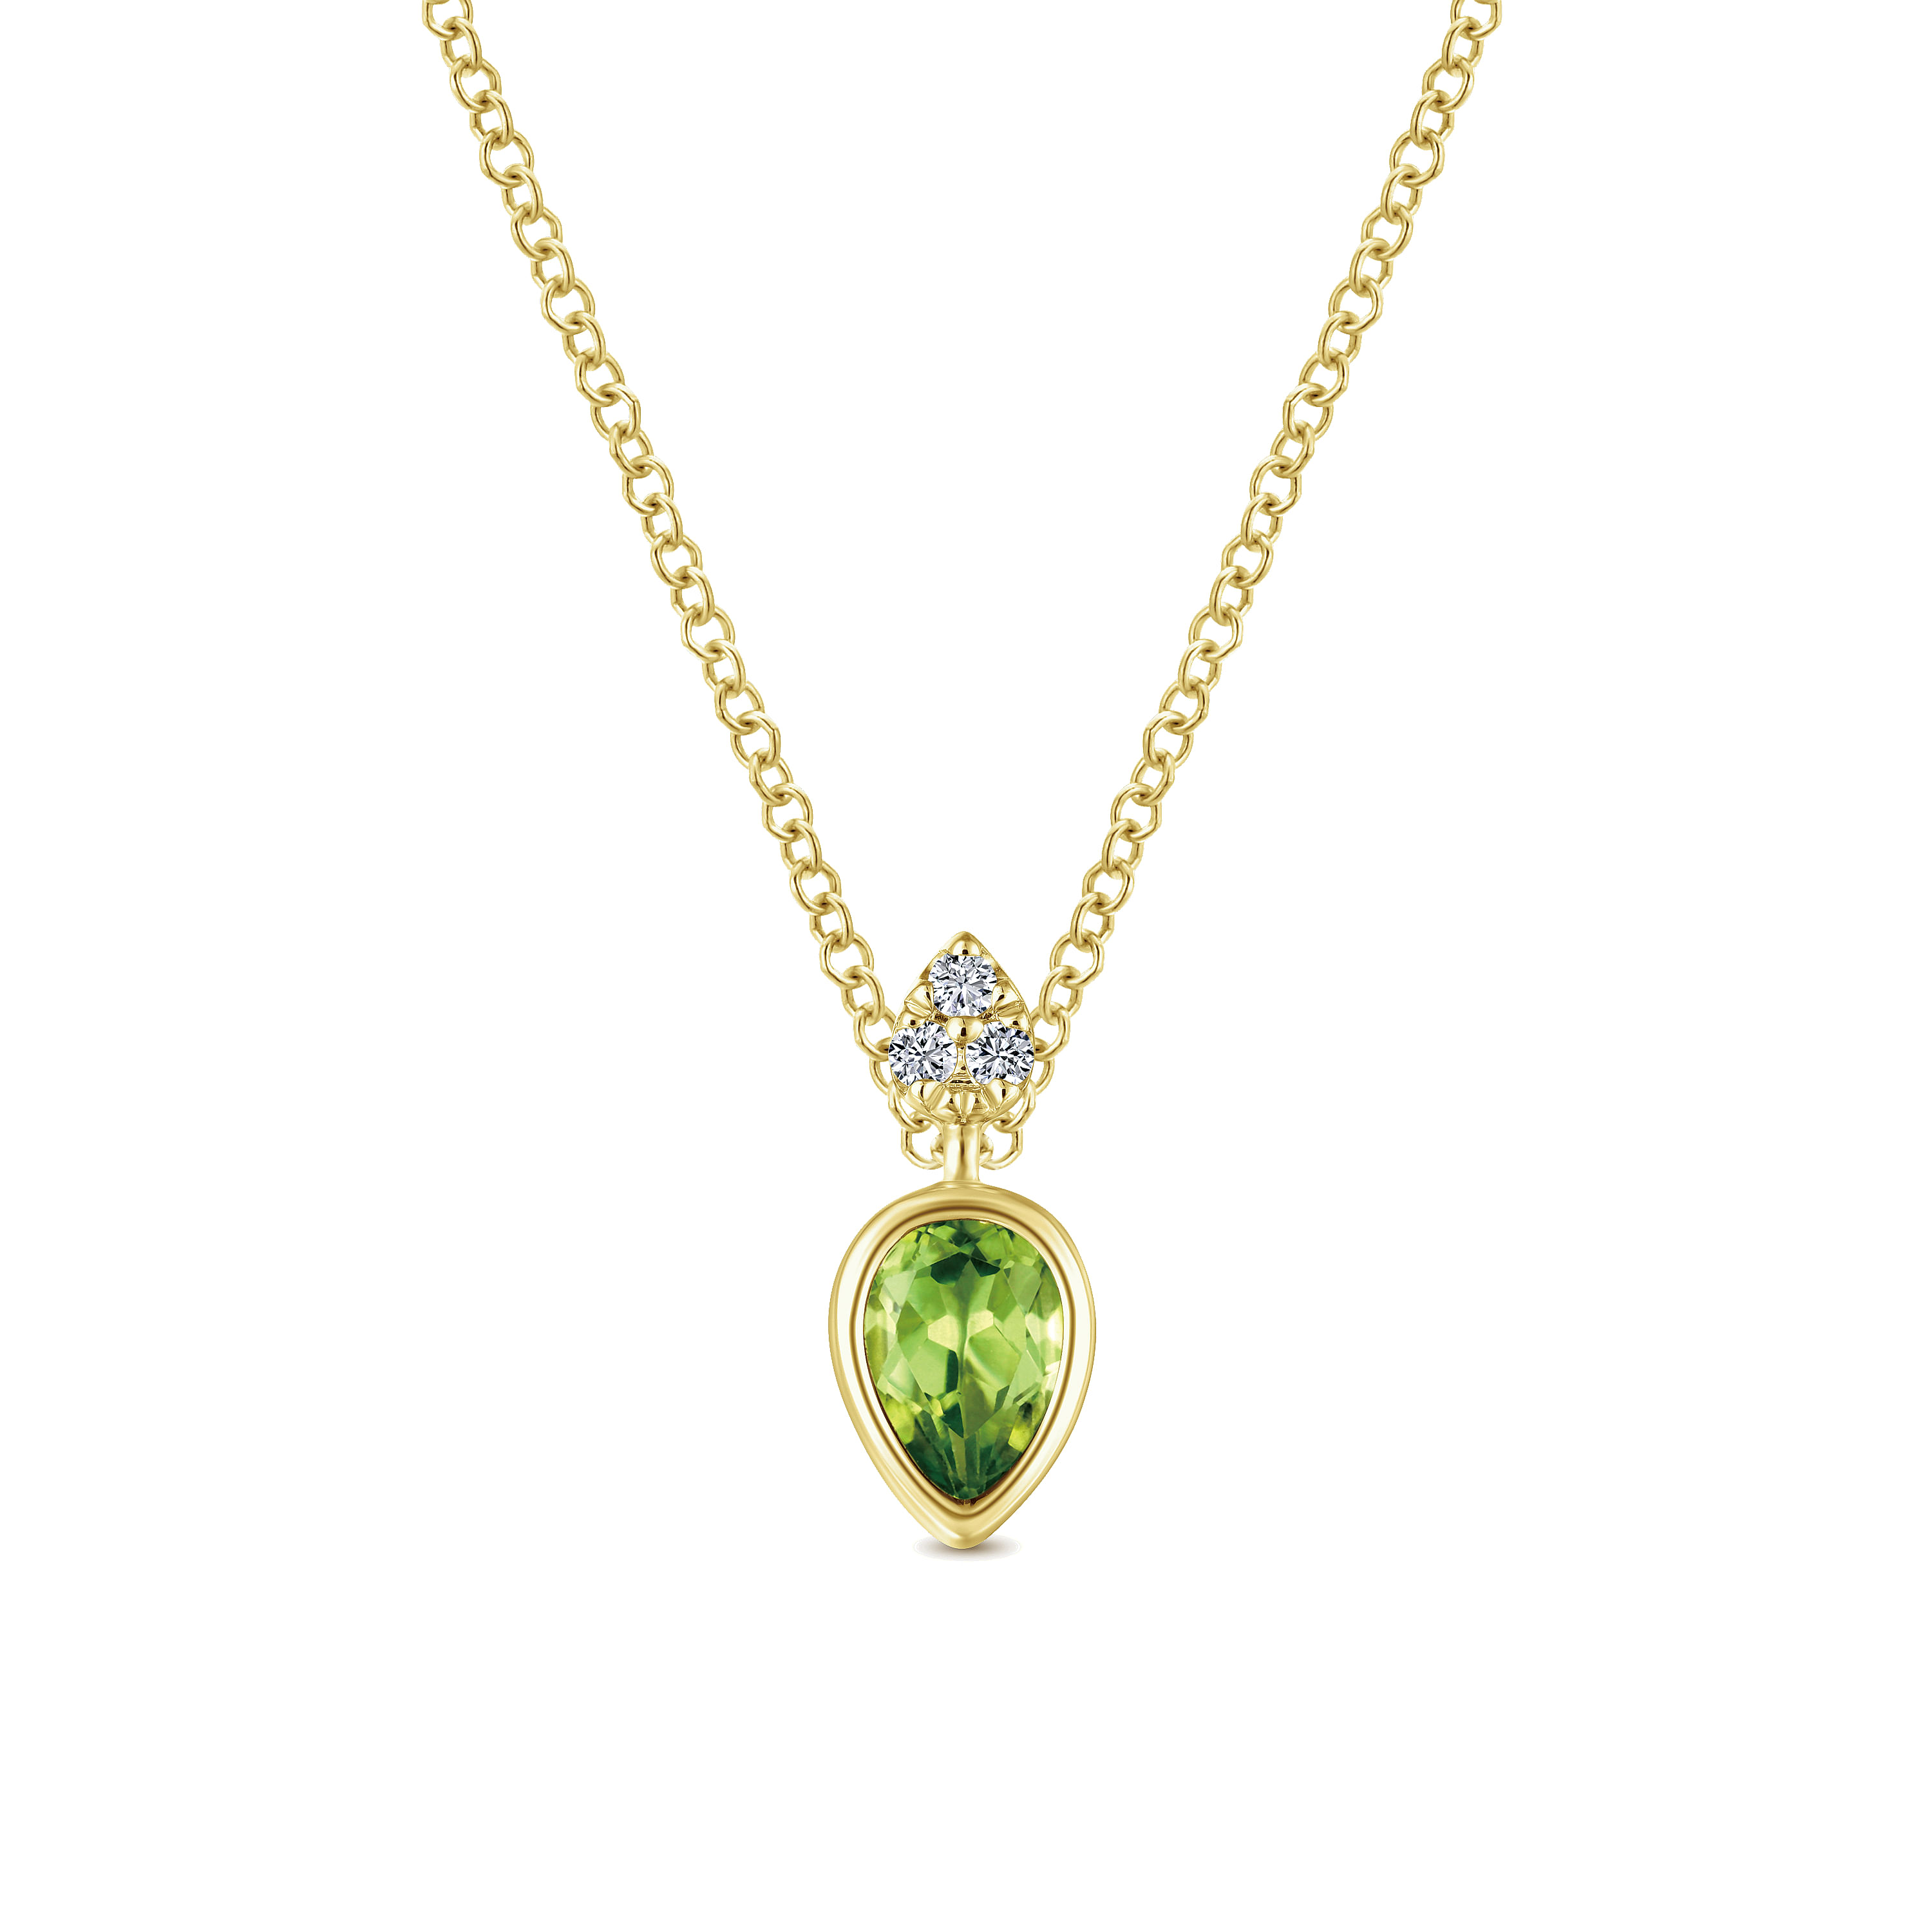 14K Yellow Gold Pear Shape Peridot Pendant Necklace with Diamond Accents